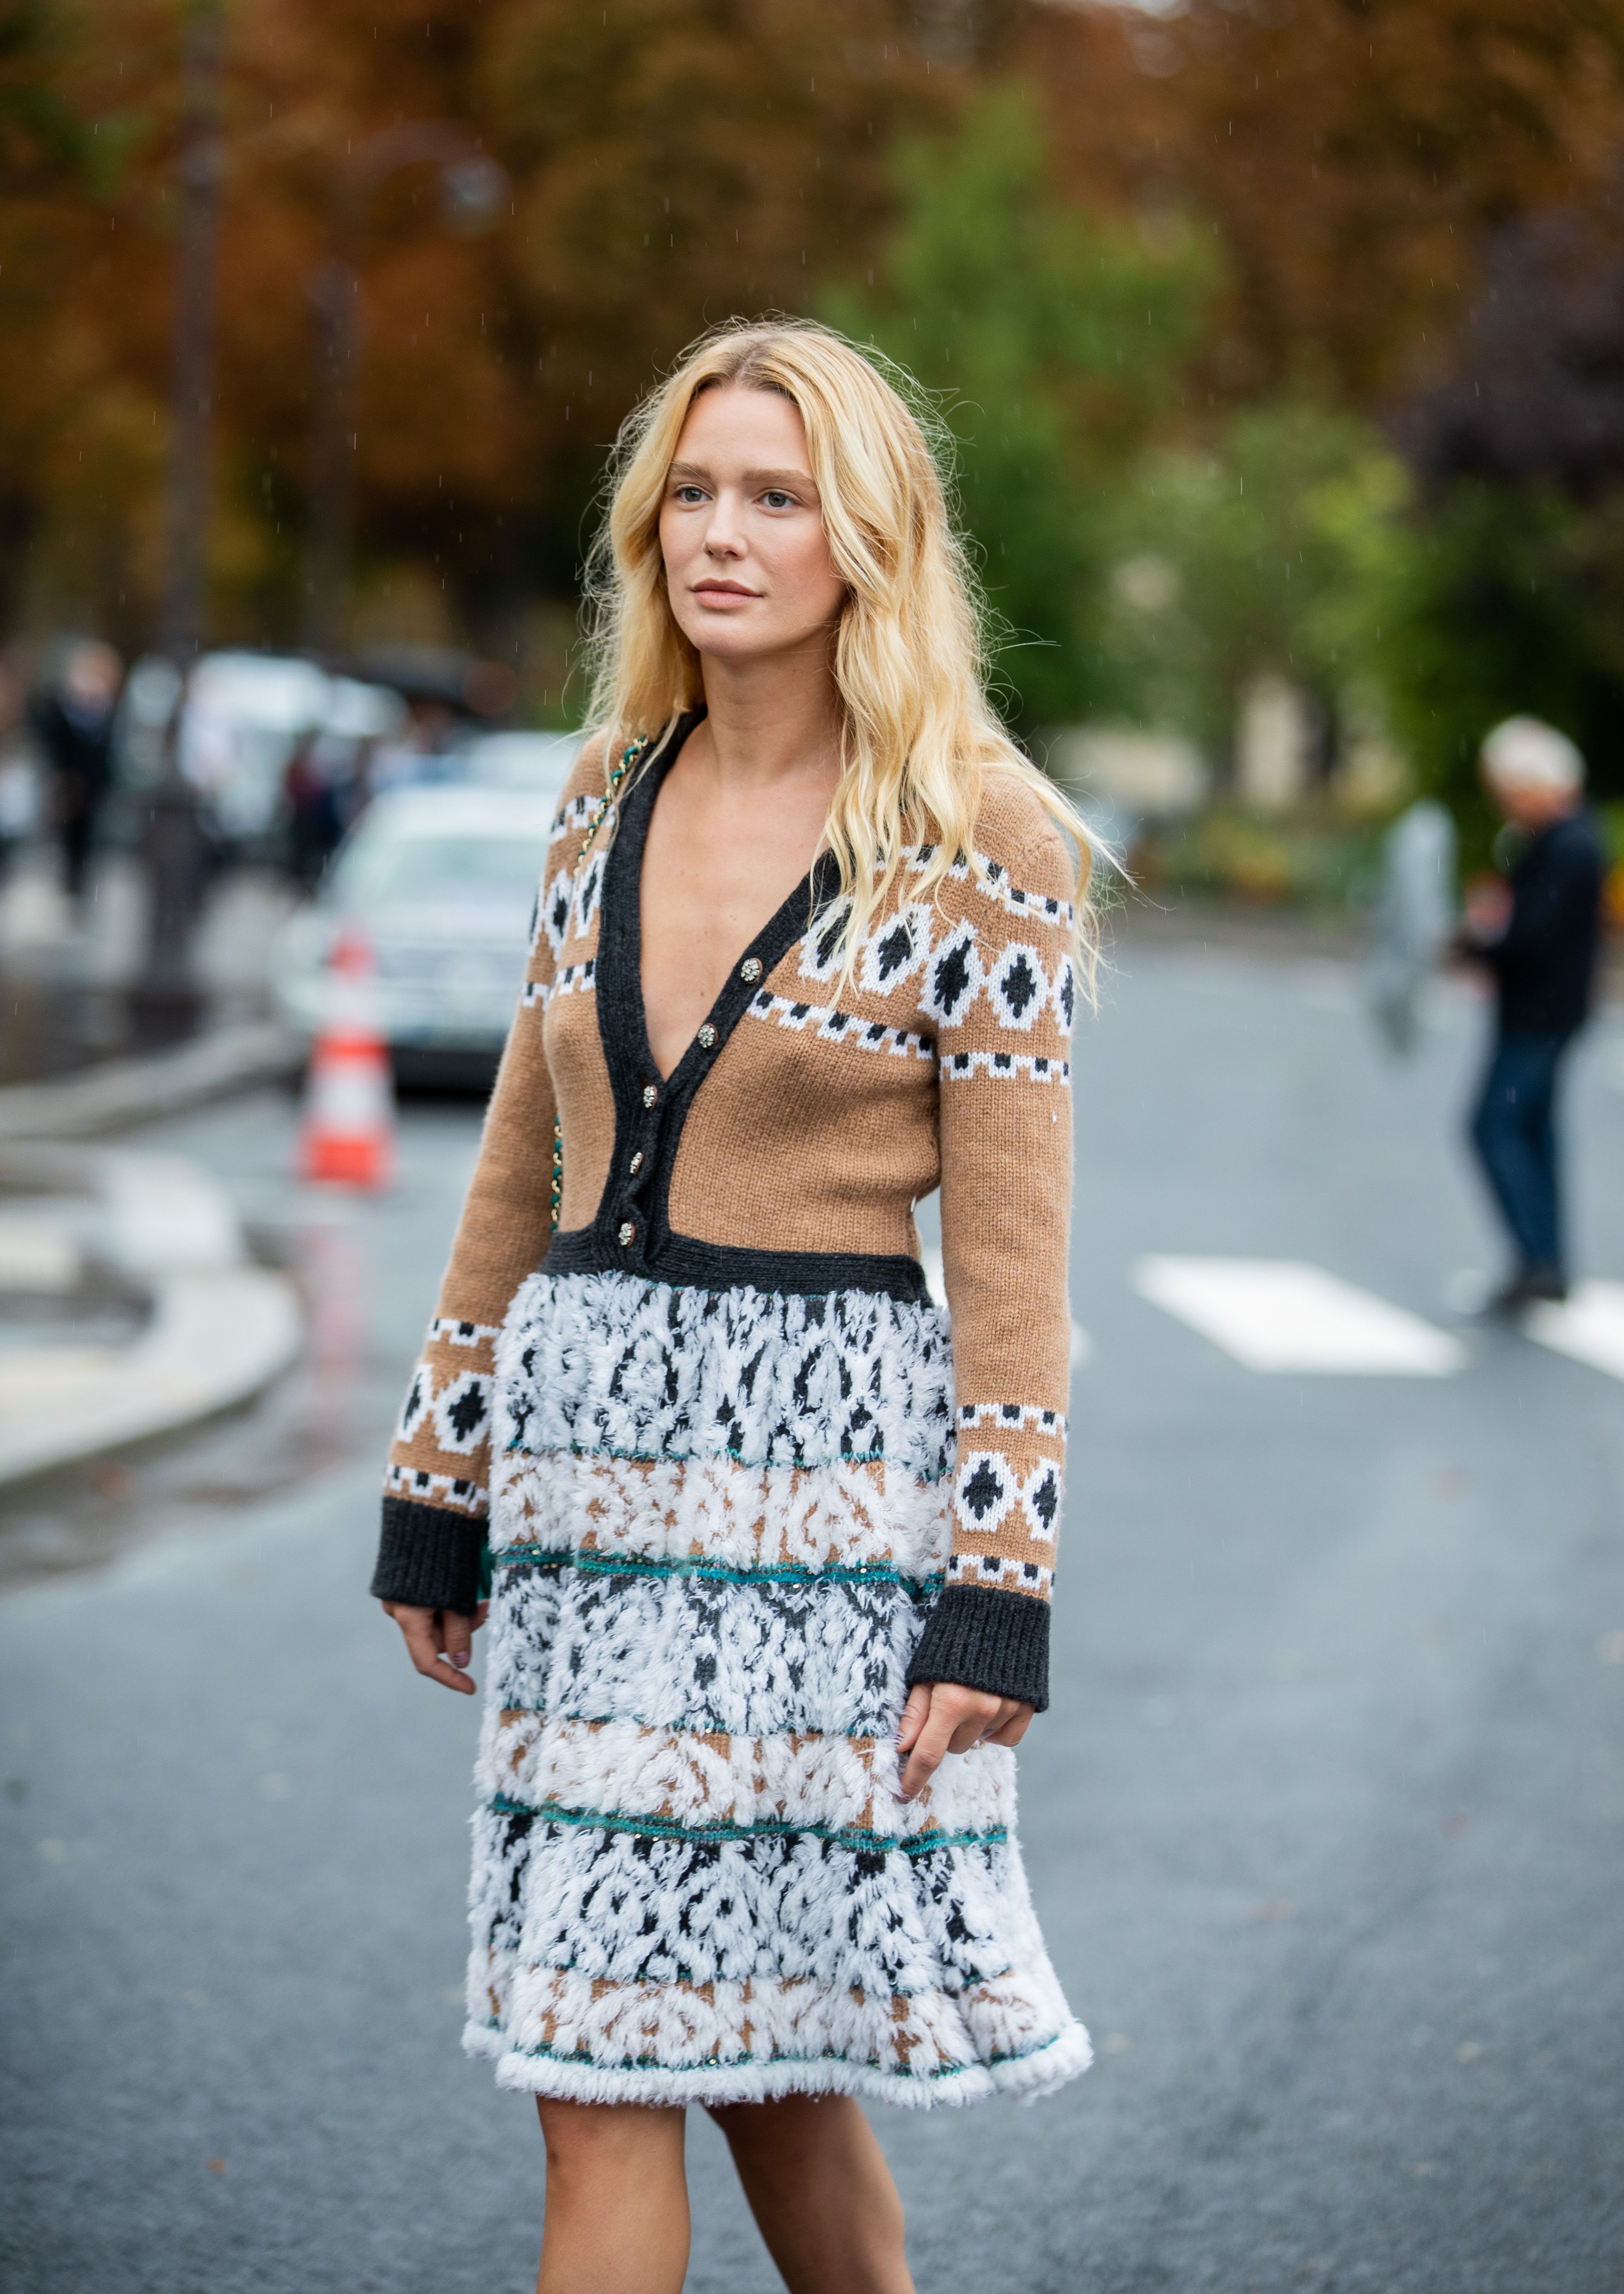 paris, france   october 01 megan adelaide schaefer seen wearing skirt, brown cardigan outside chanel during paris fashion week womenswear spring summer 2020 on october 01, 2019 in paris, france photo by christian vieriggetty images